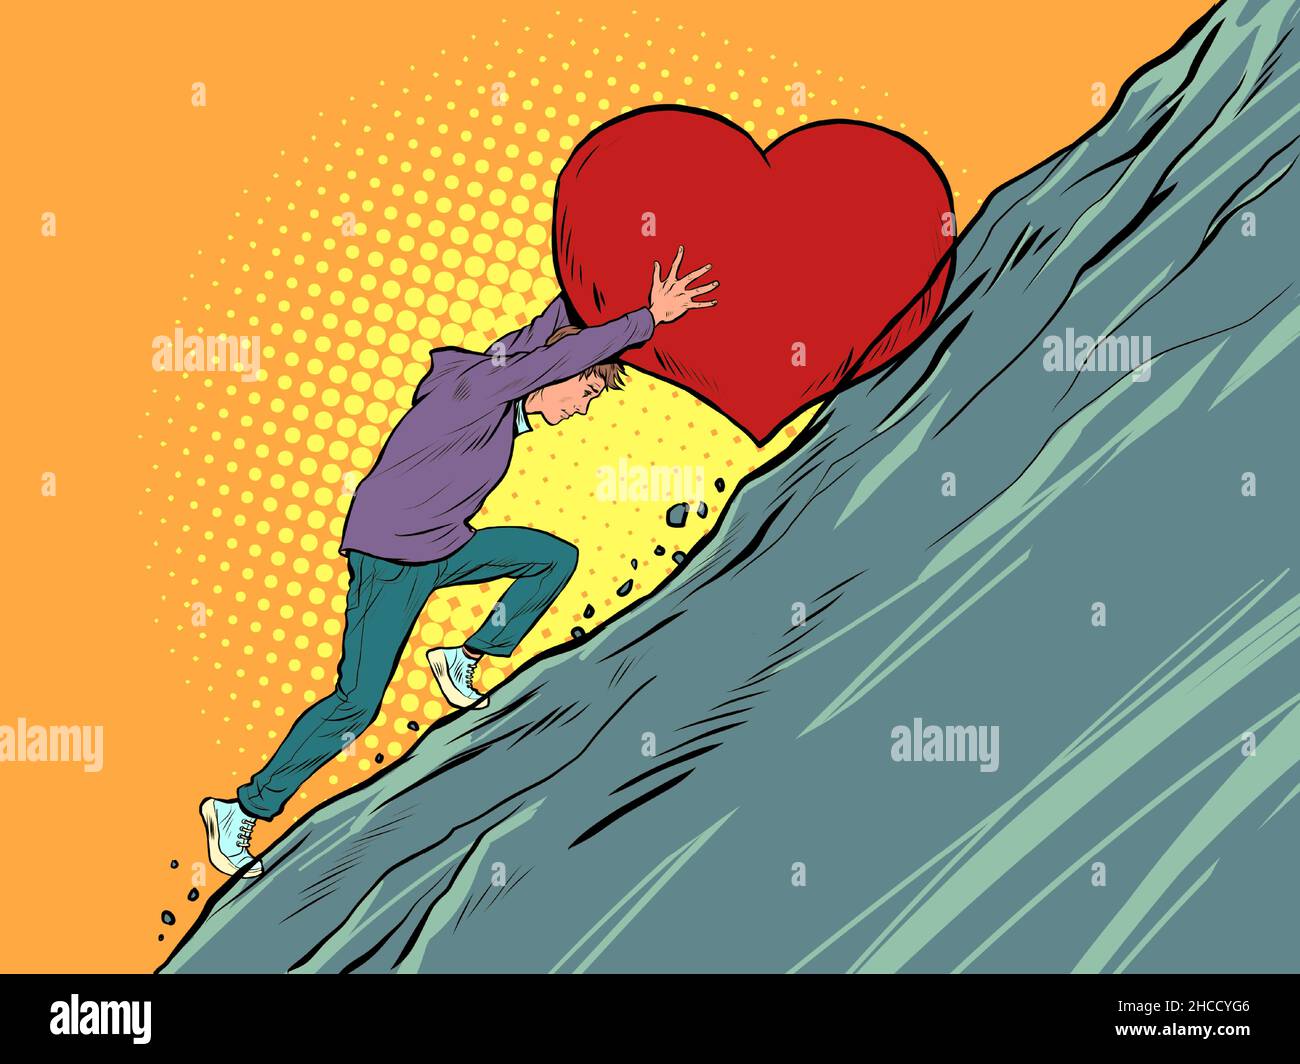 sisyphean labor a lover believes in love, rolls a valentines heart up the mountain Stock Vector